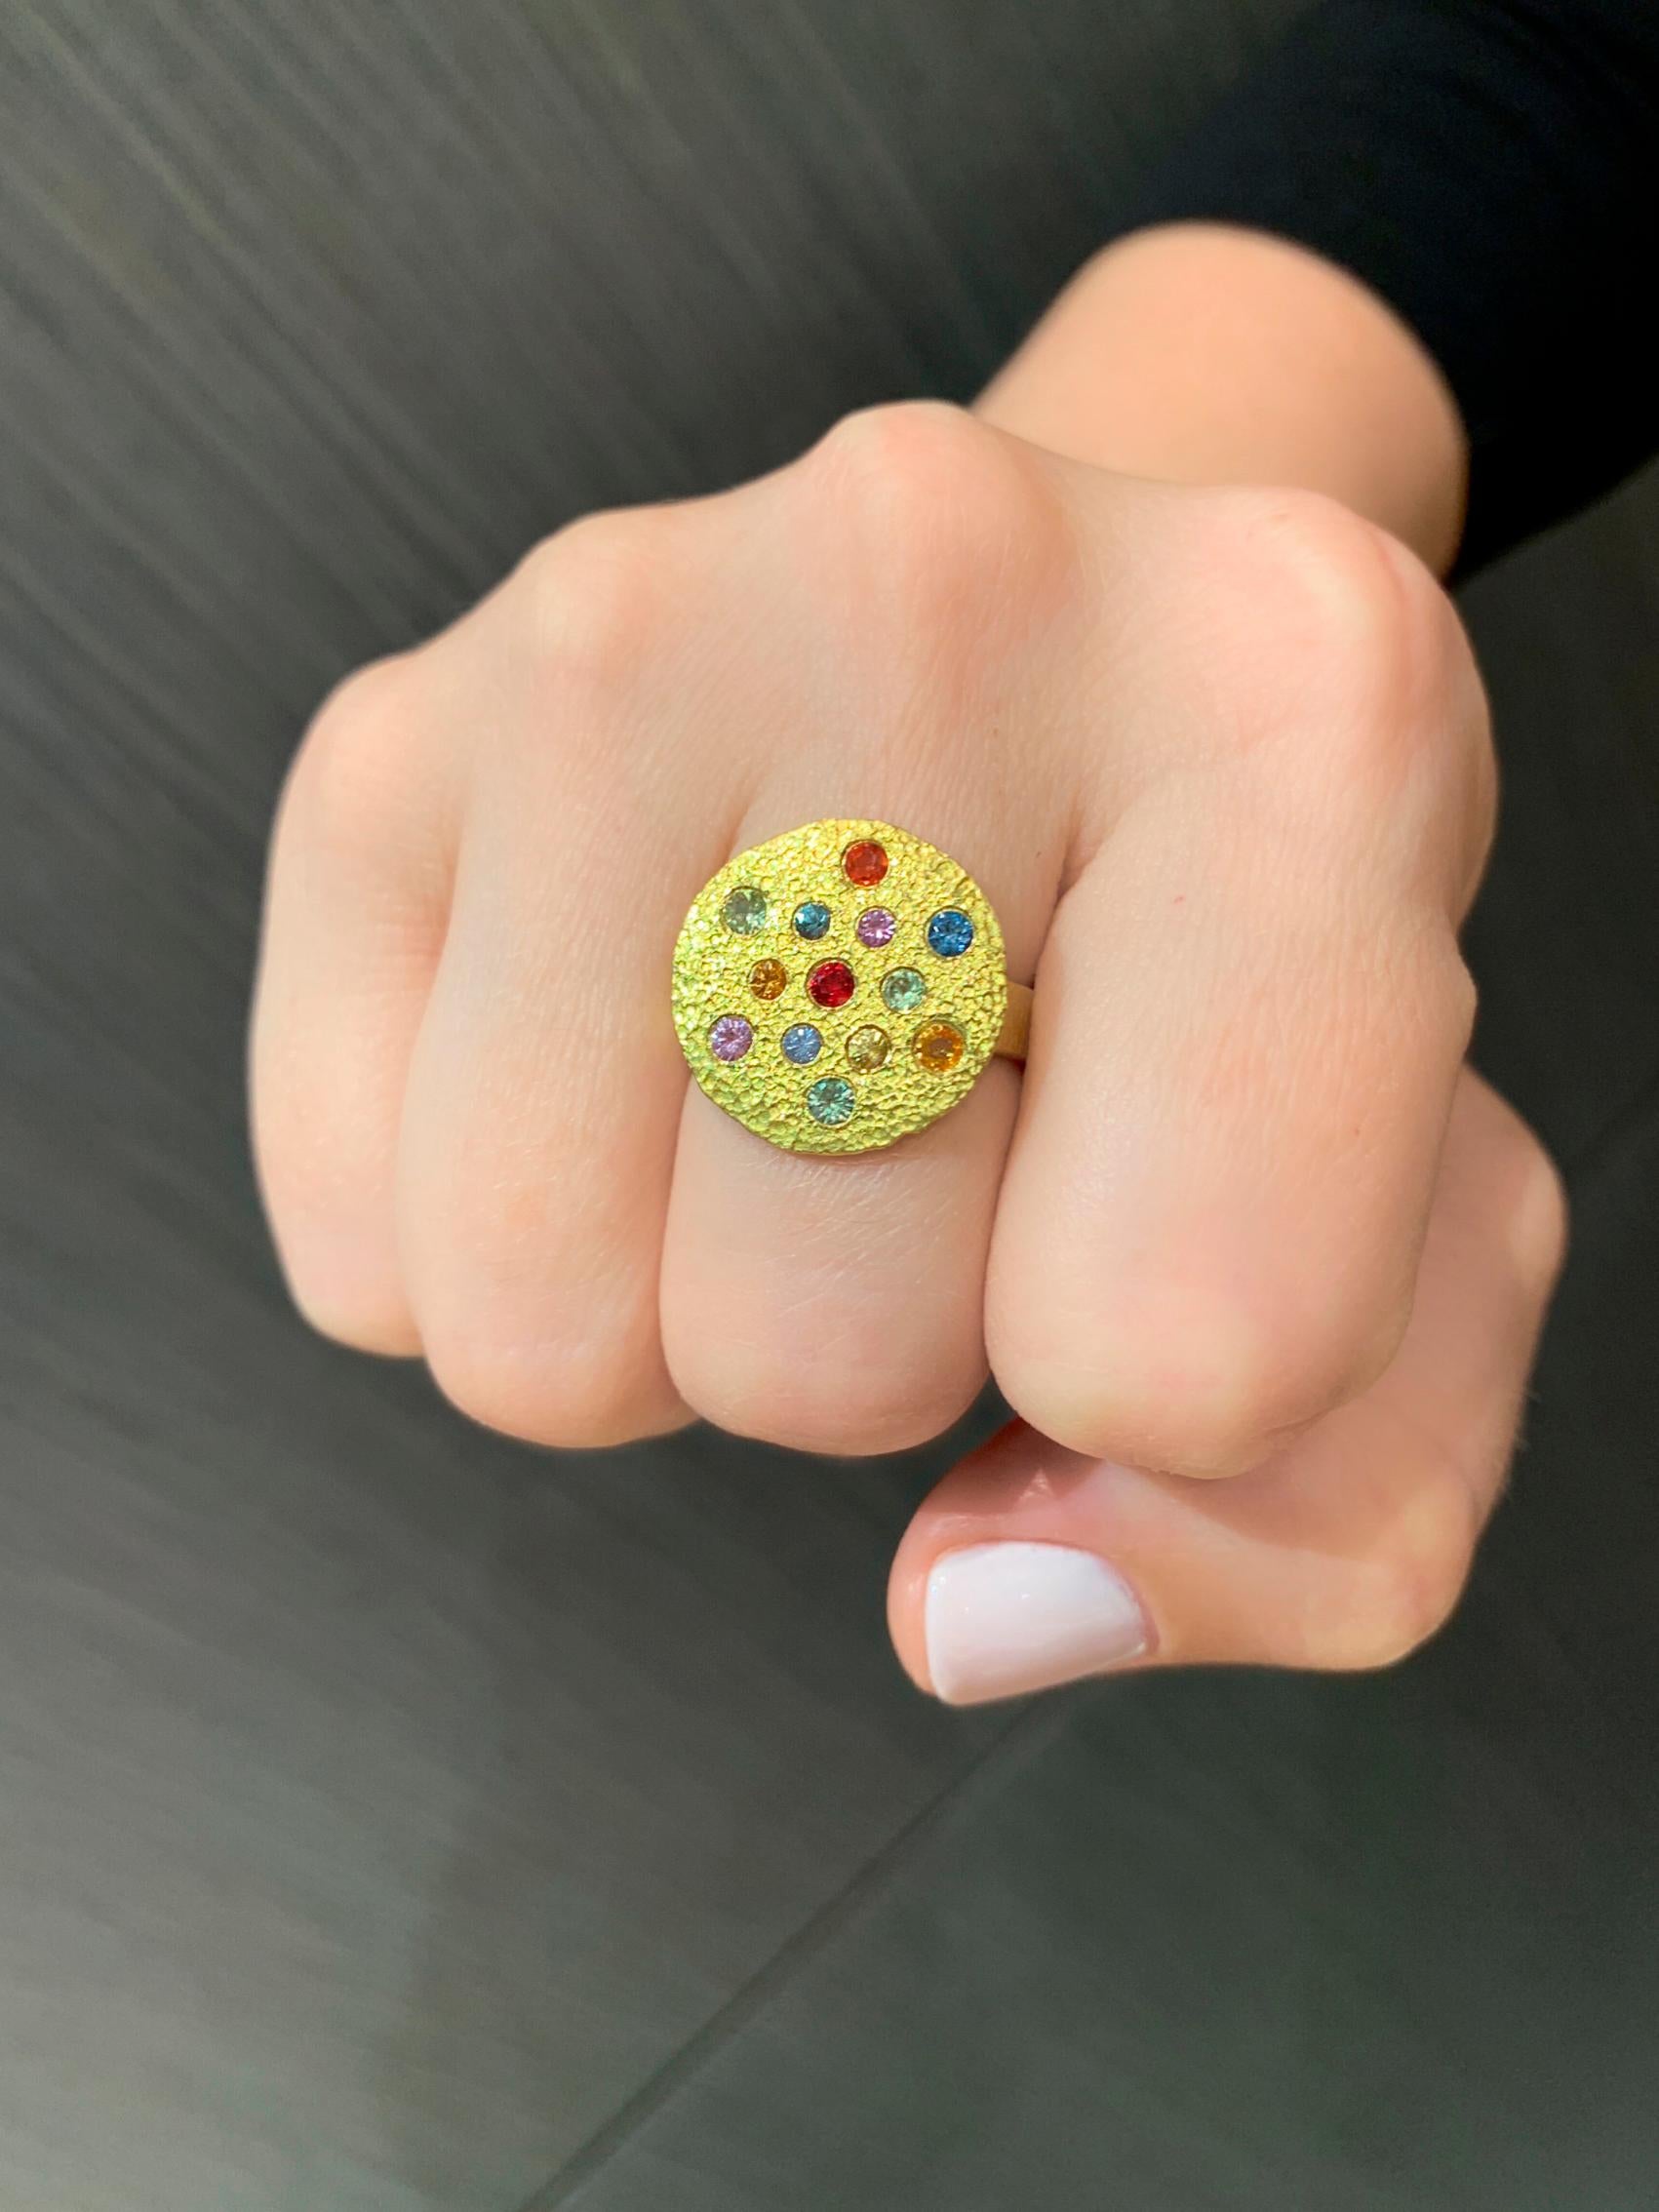 One of a Kind Lava Disc Ring handmade by acclaimed jewelry artist Petra Class featuring an assortment of shimmering, vibrant multicolored sapphires (blue, red, violet, orange, yellow, green, periwinkle, and teal), individually bezel-set in the